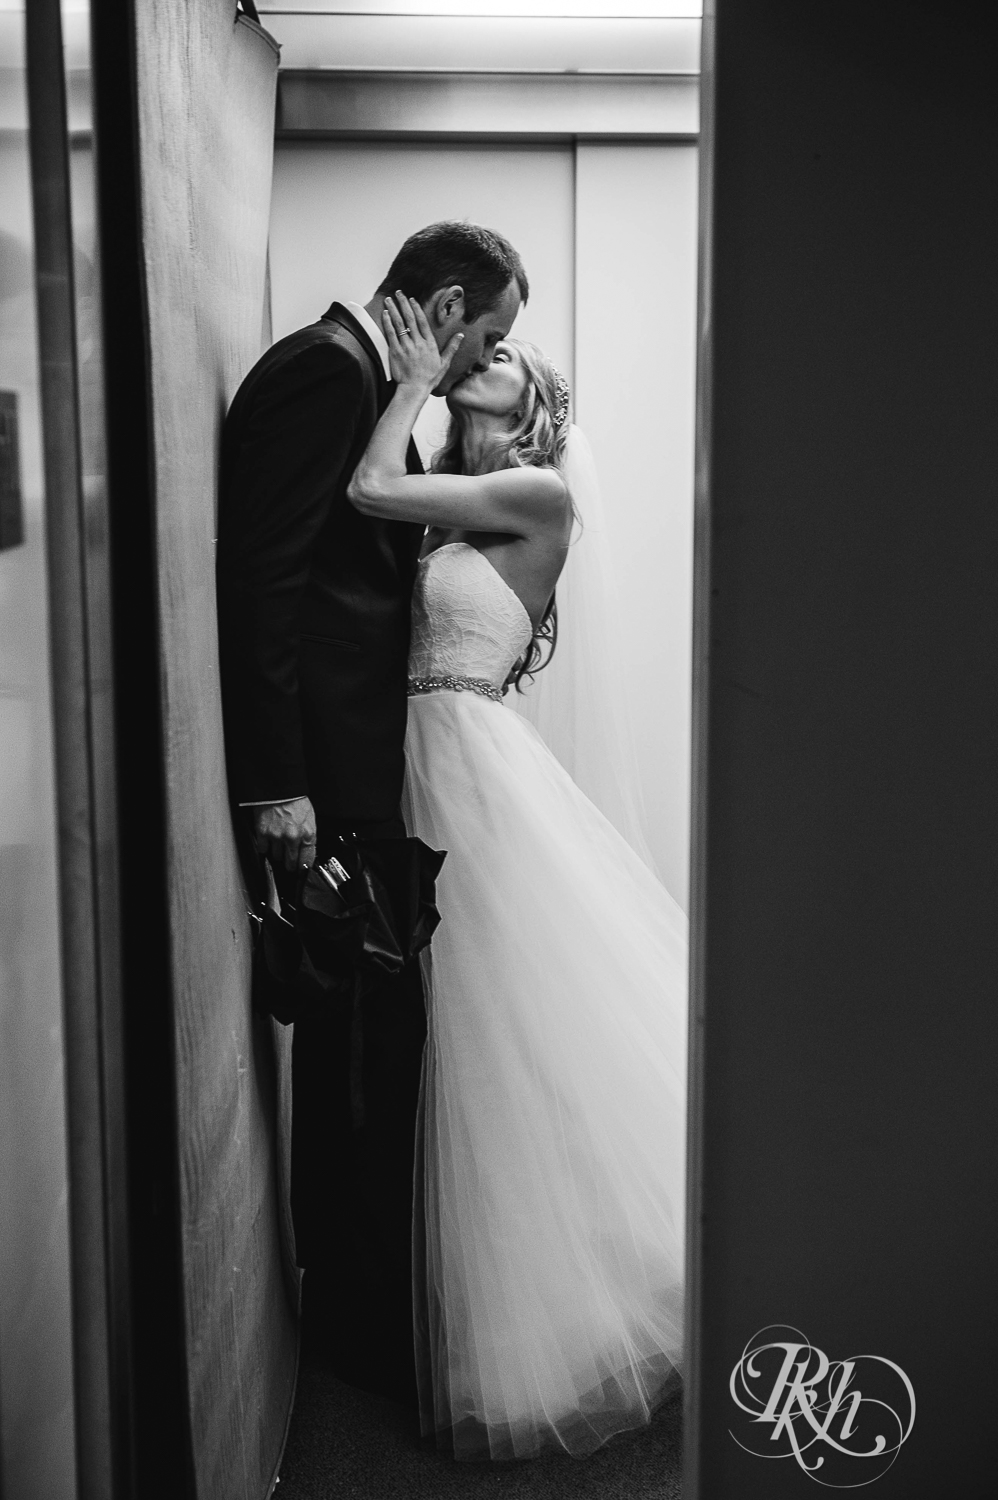 Bride and groom kiss in elevator after wedding at White Bear Yacht Club in Dellwood, Minnesota.